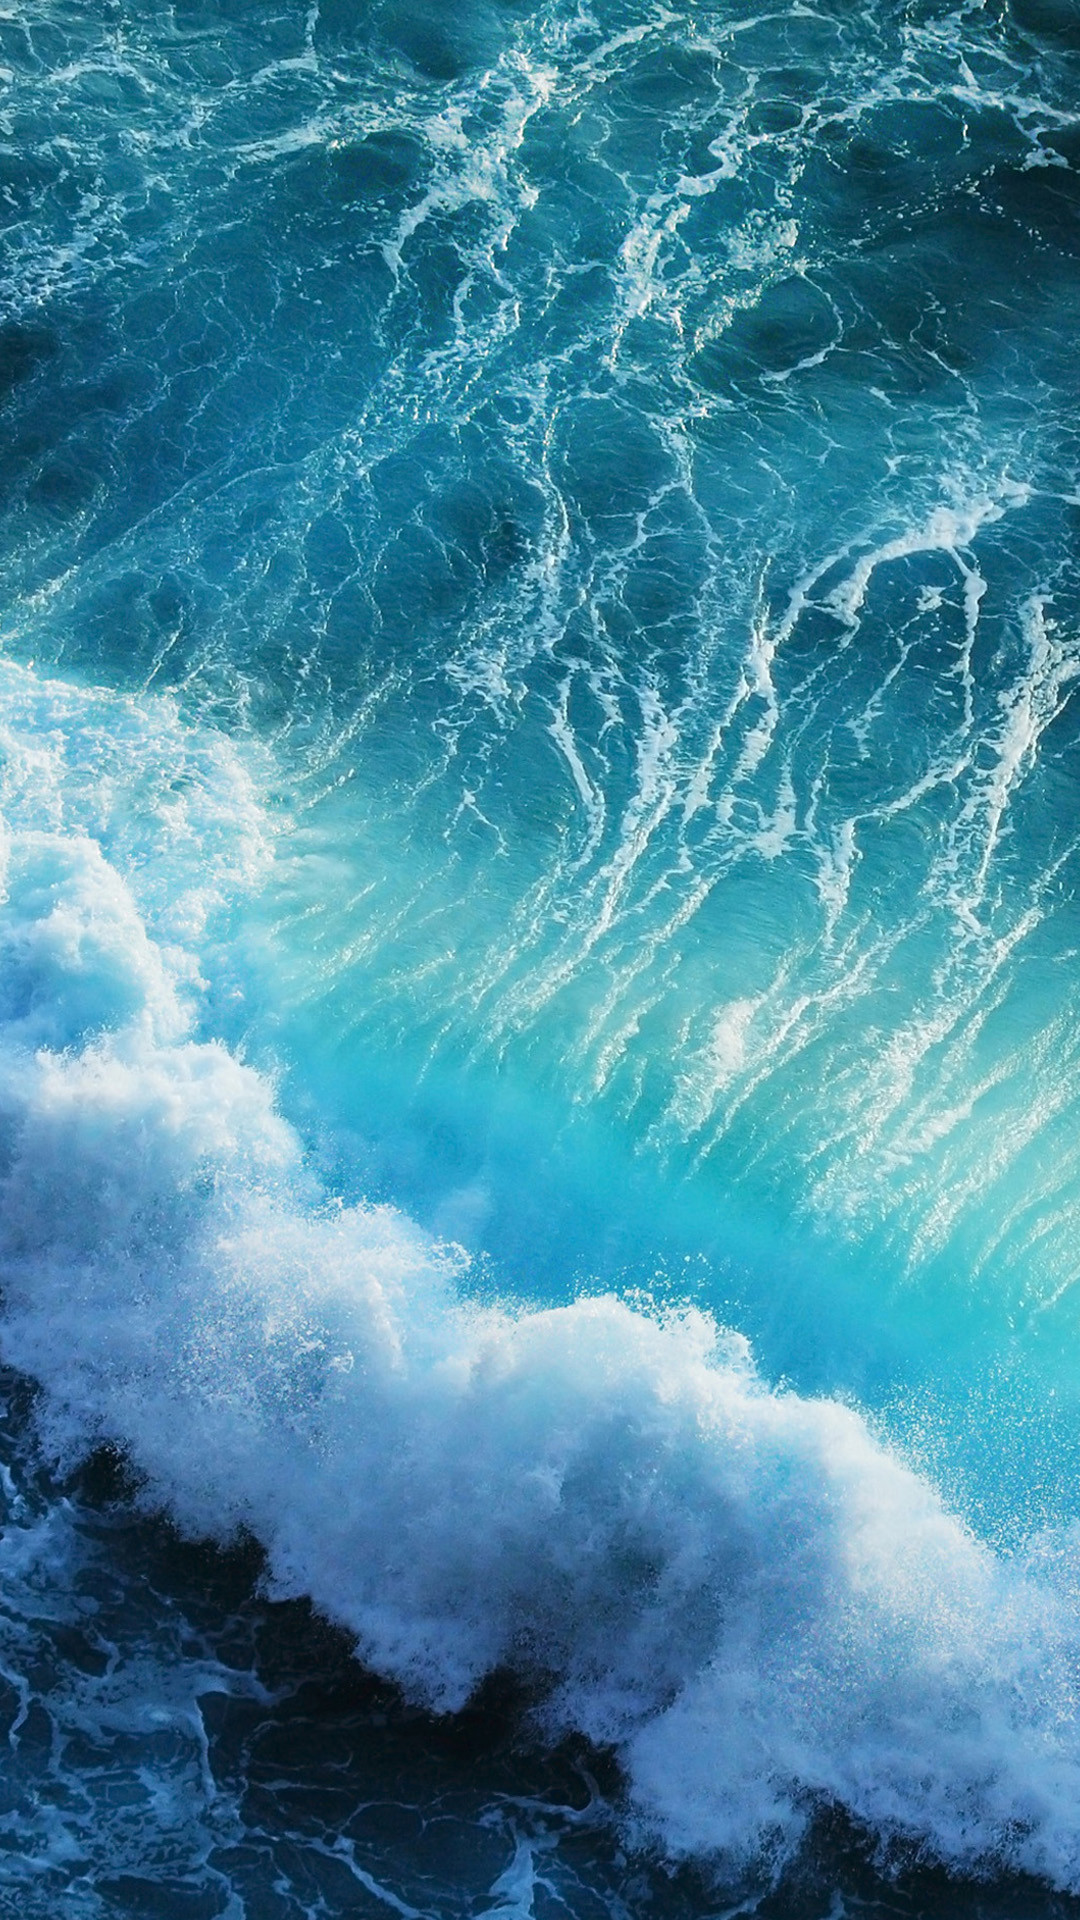 1080x1920 Blue sea water wallpapers for iphone 6 plus